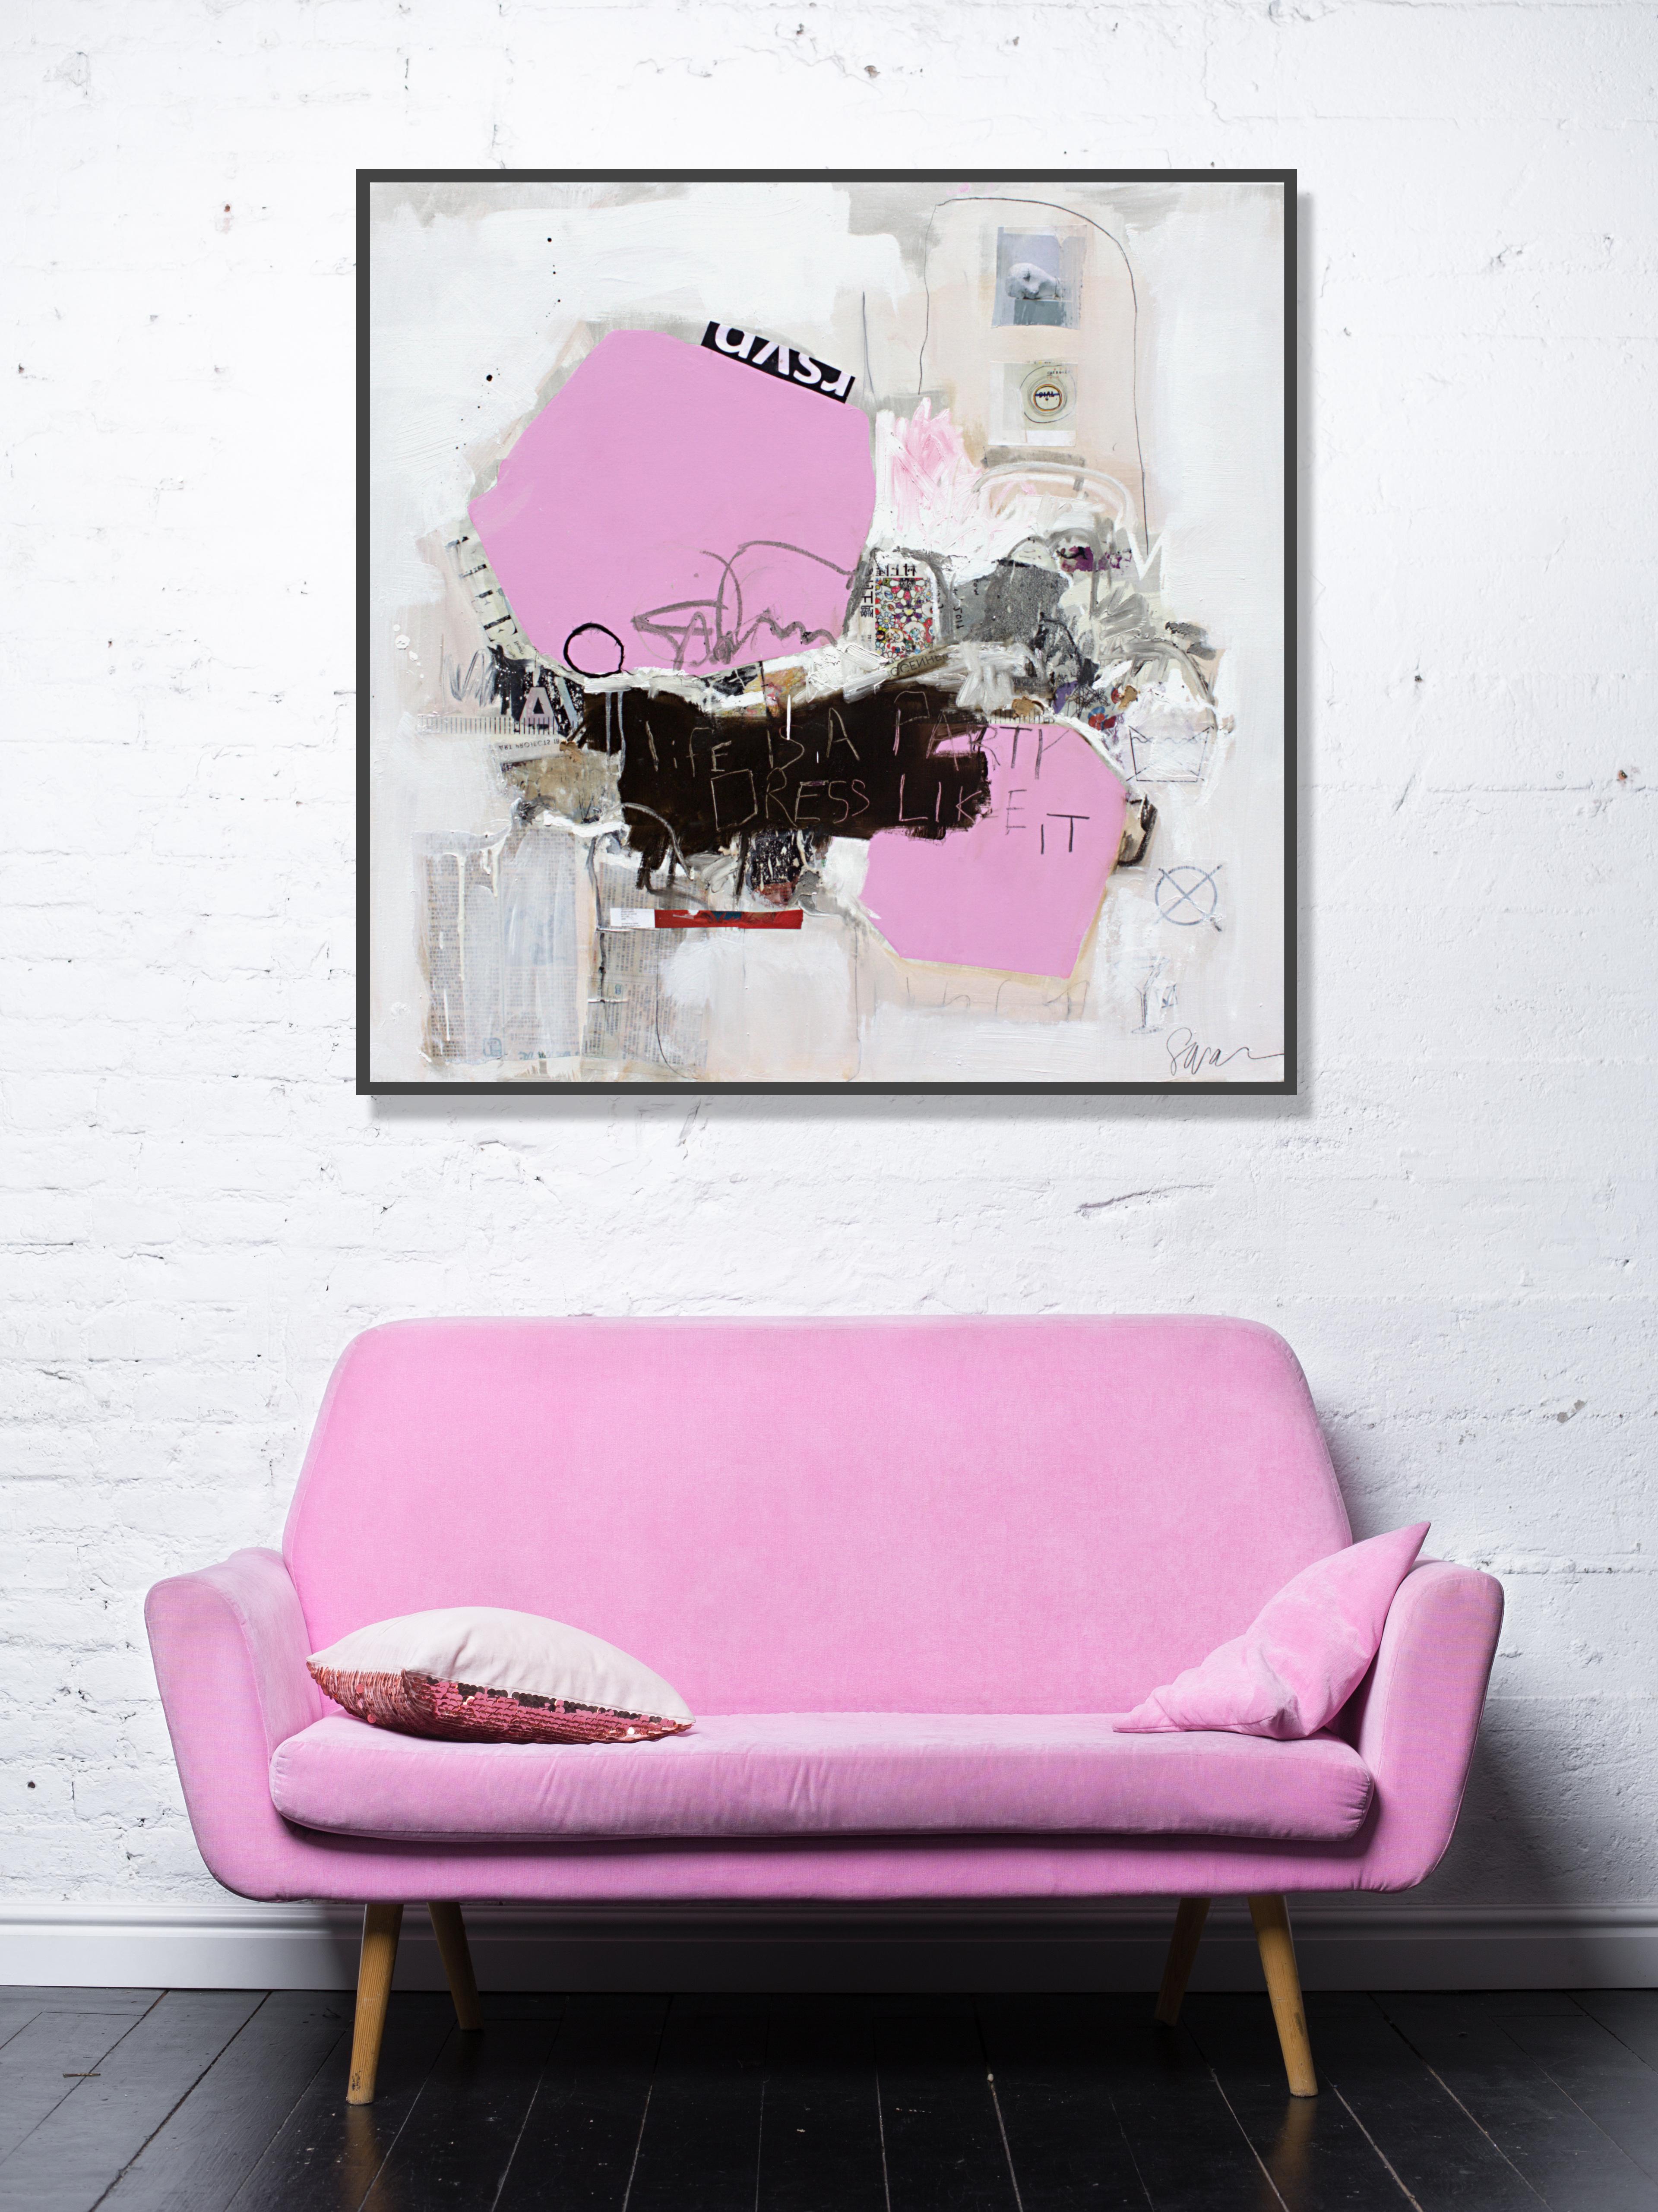 Life is A Party - textural abstract painting dominant white and pink color - Painting by Susan Washington